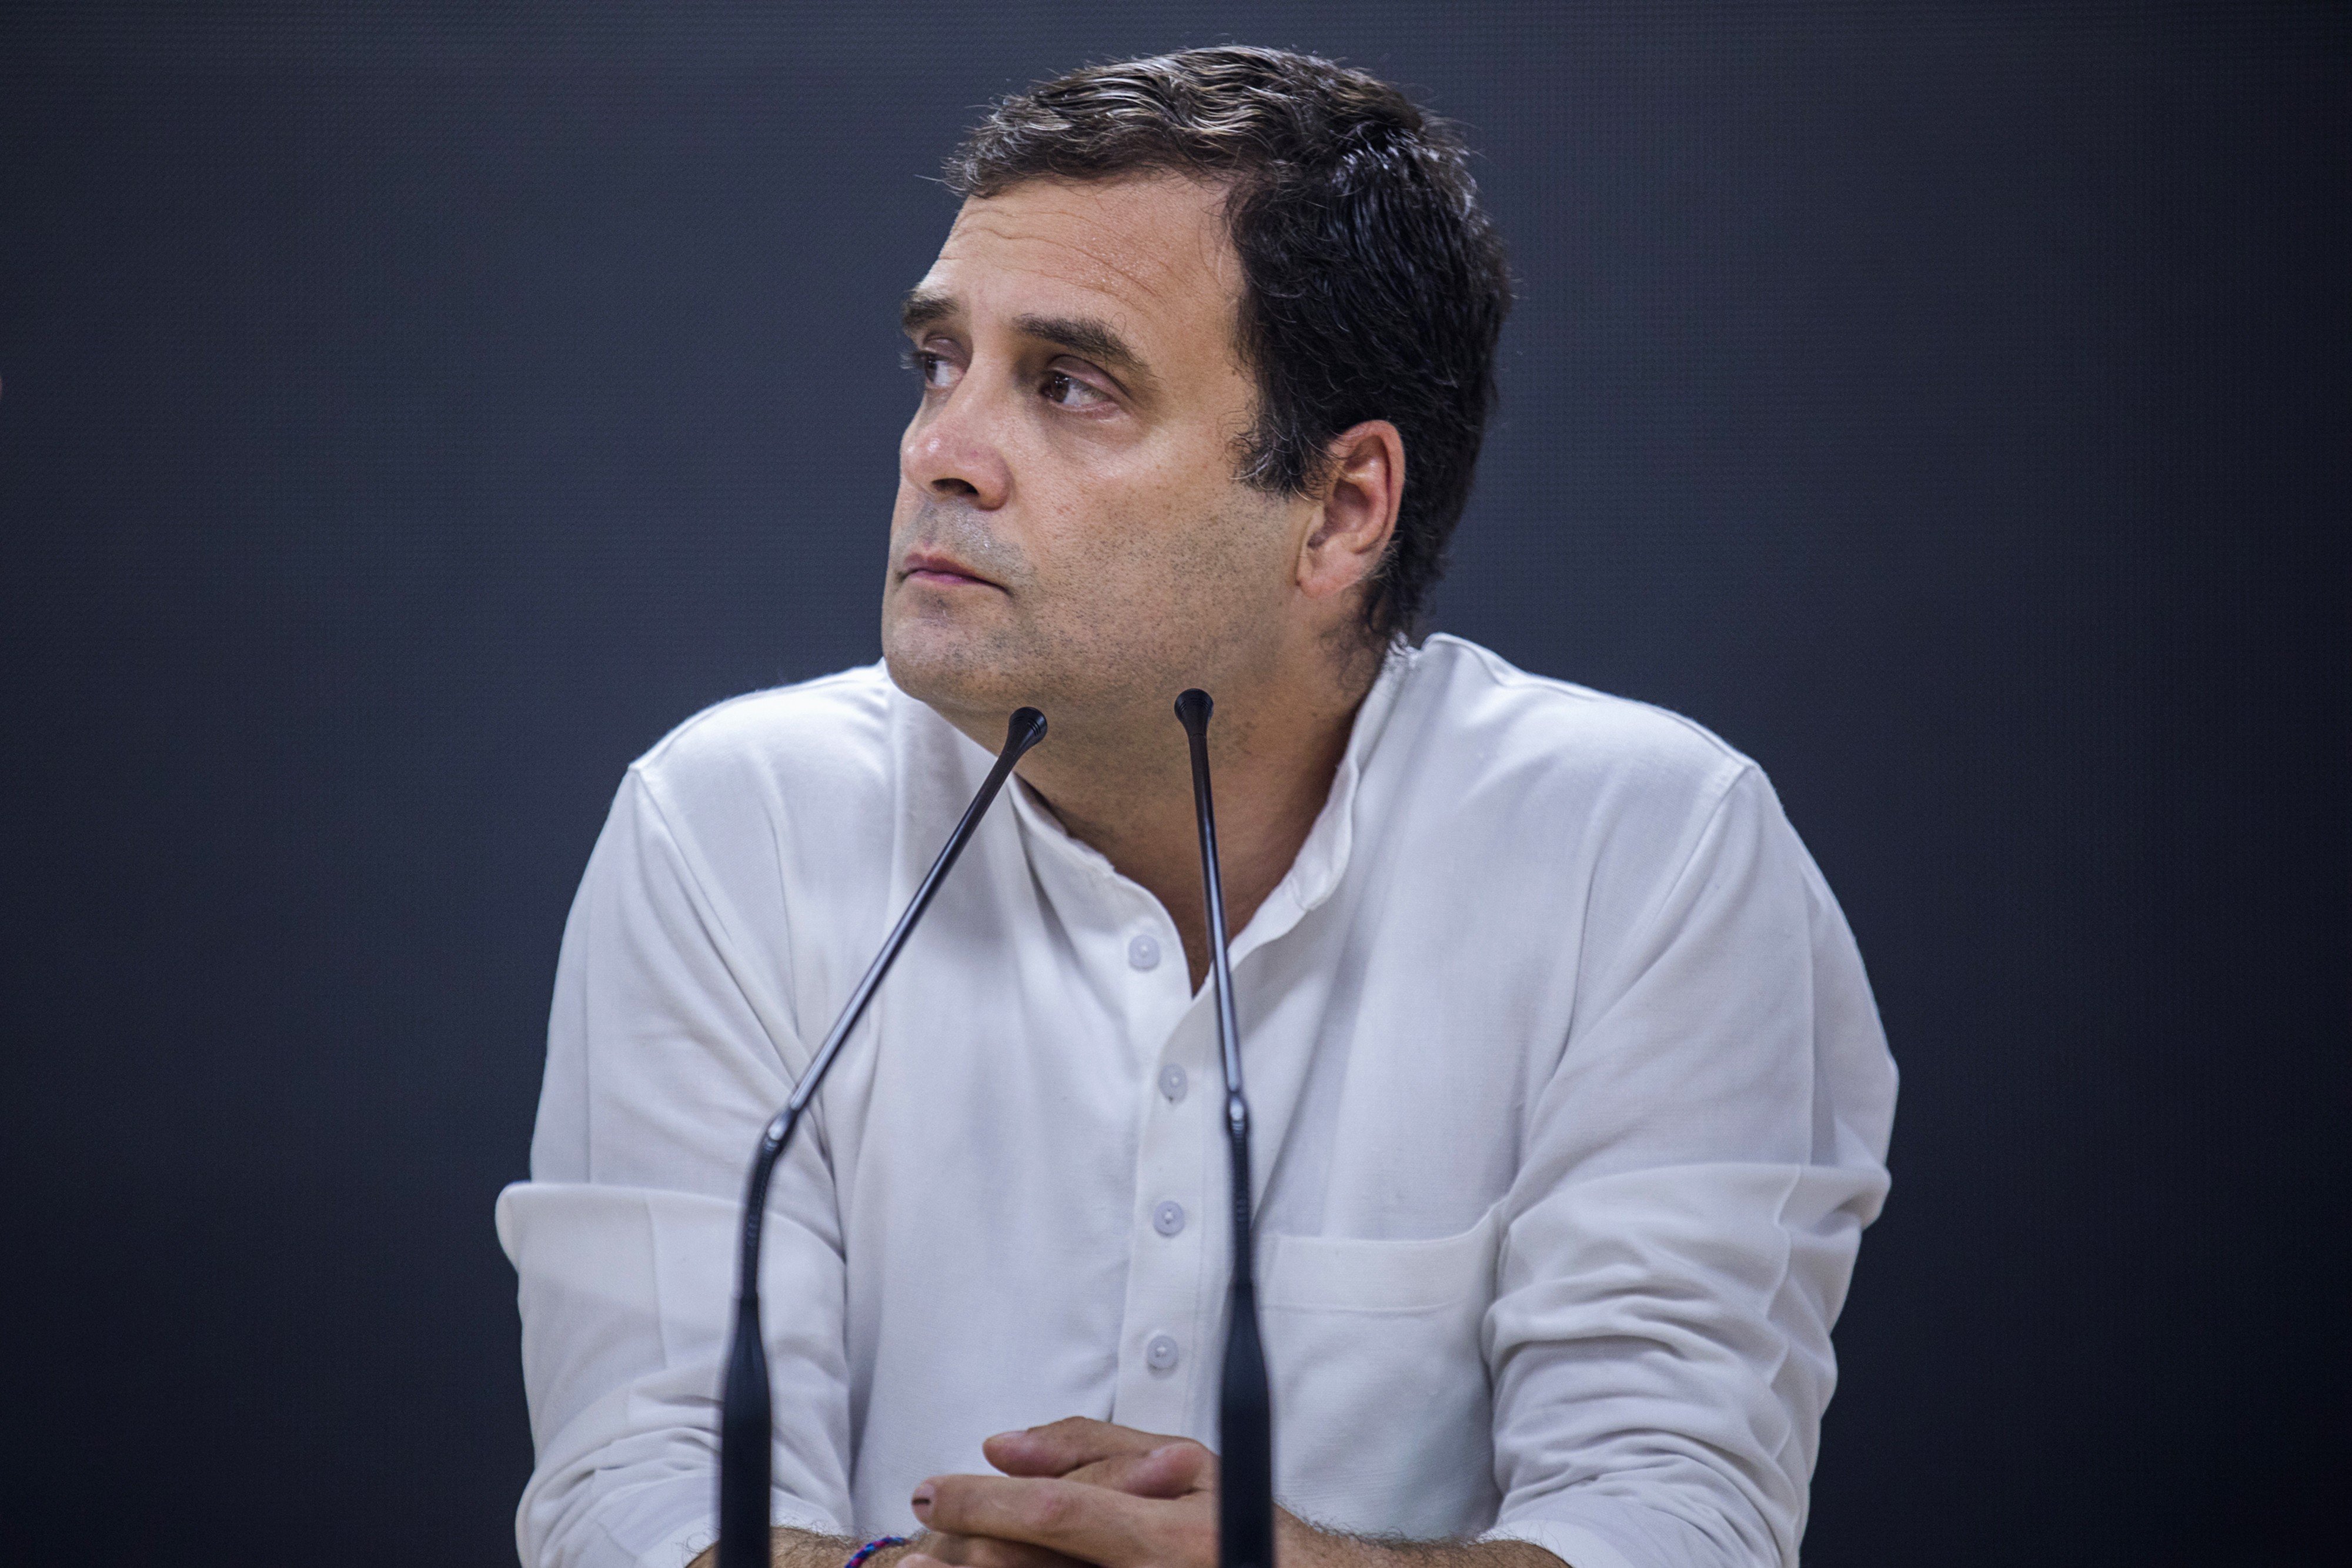 Rahul Gandhi, president of the Indian National Congress party. Photo: Bloomberg